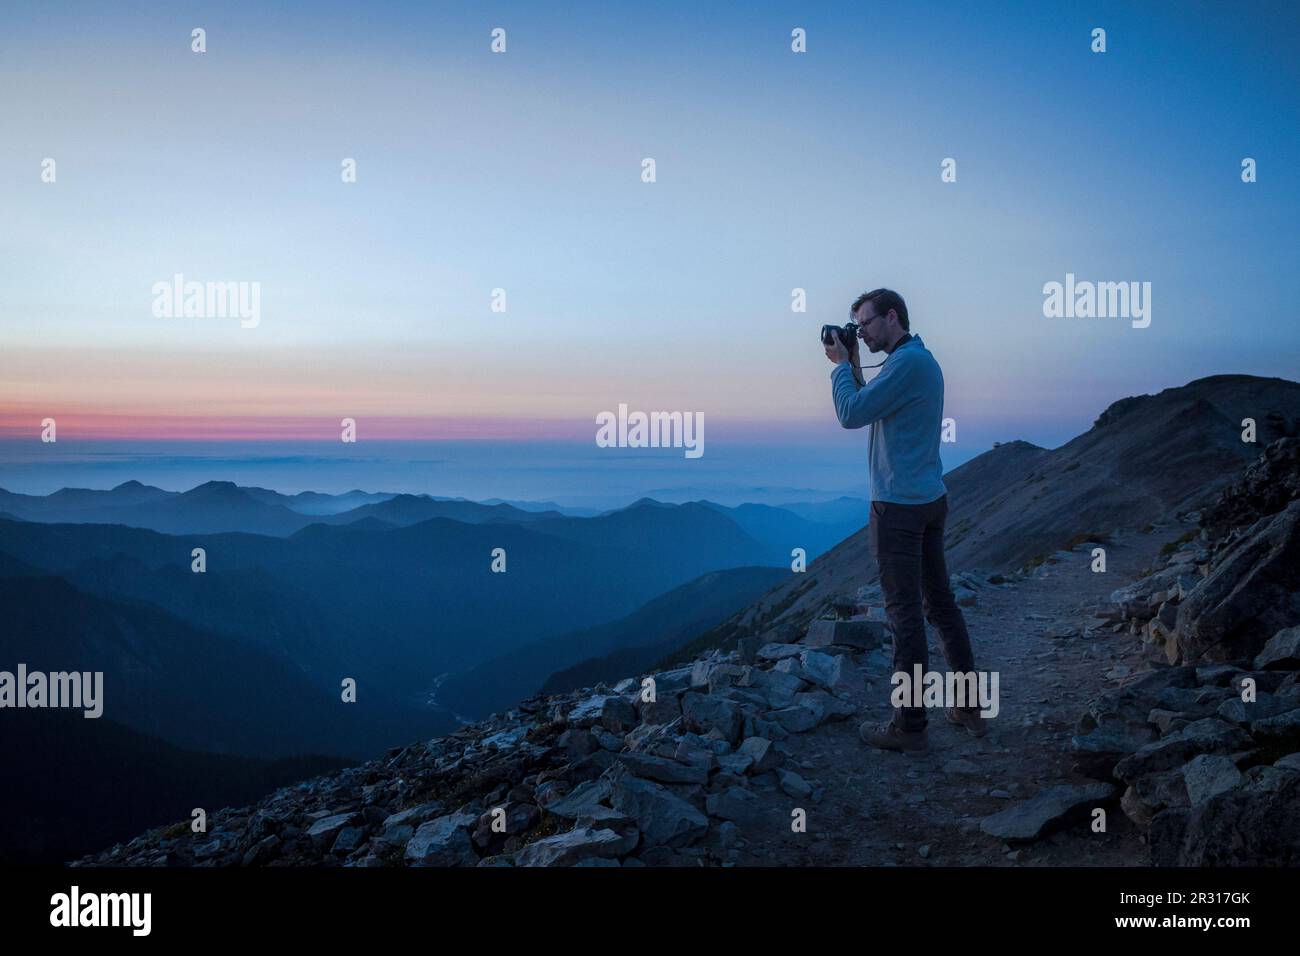 A Man is Taking Pictures of Evening Mountains in Mt. Rainier NP Stock Photo